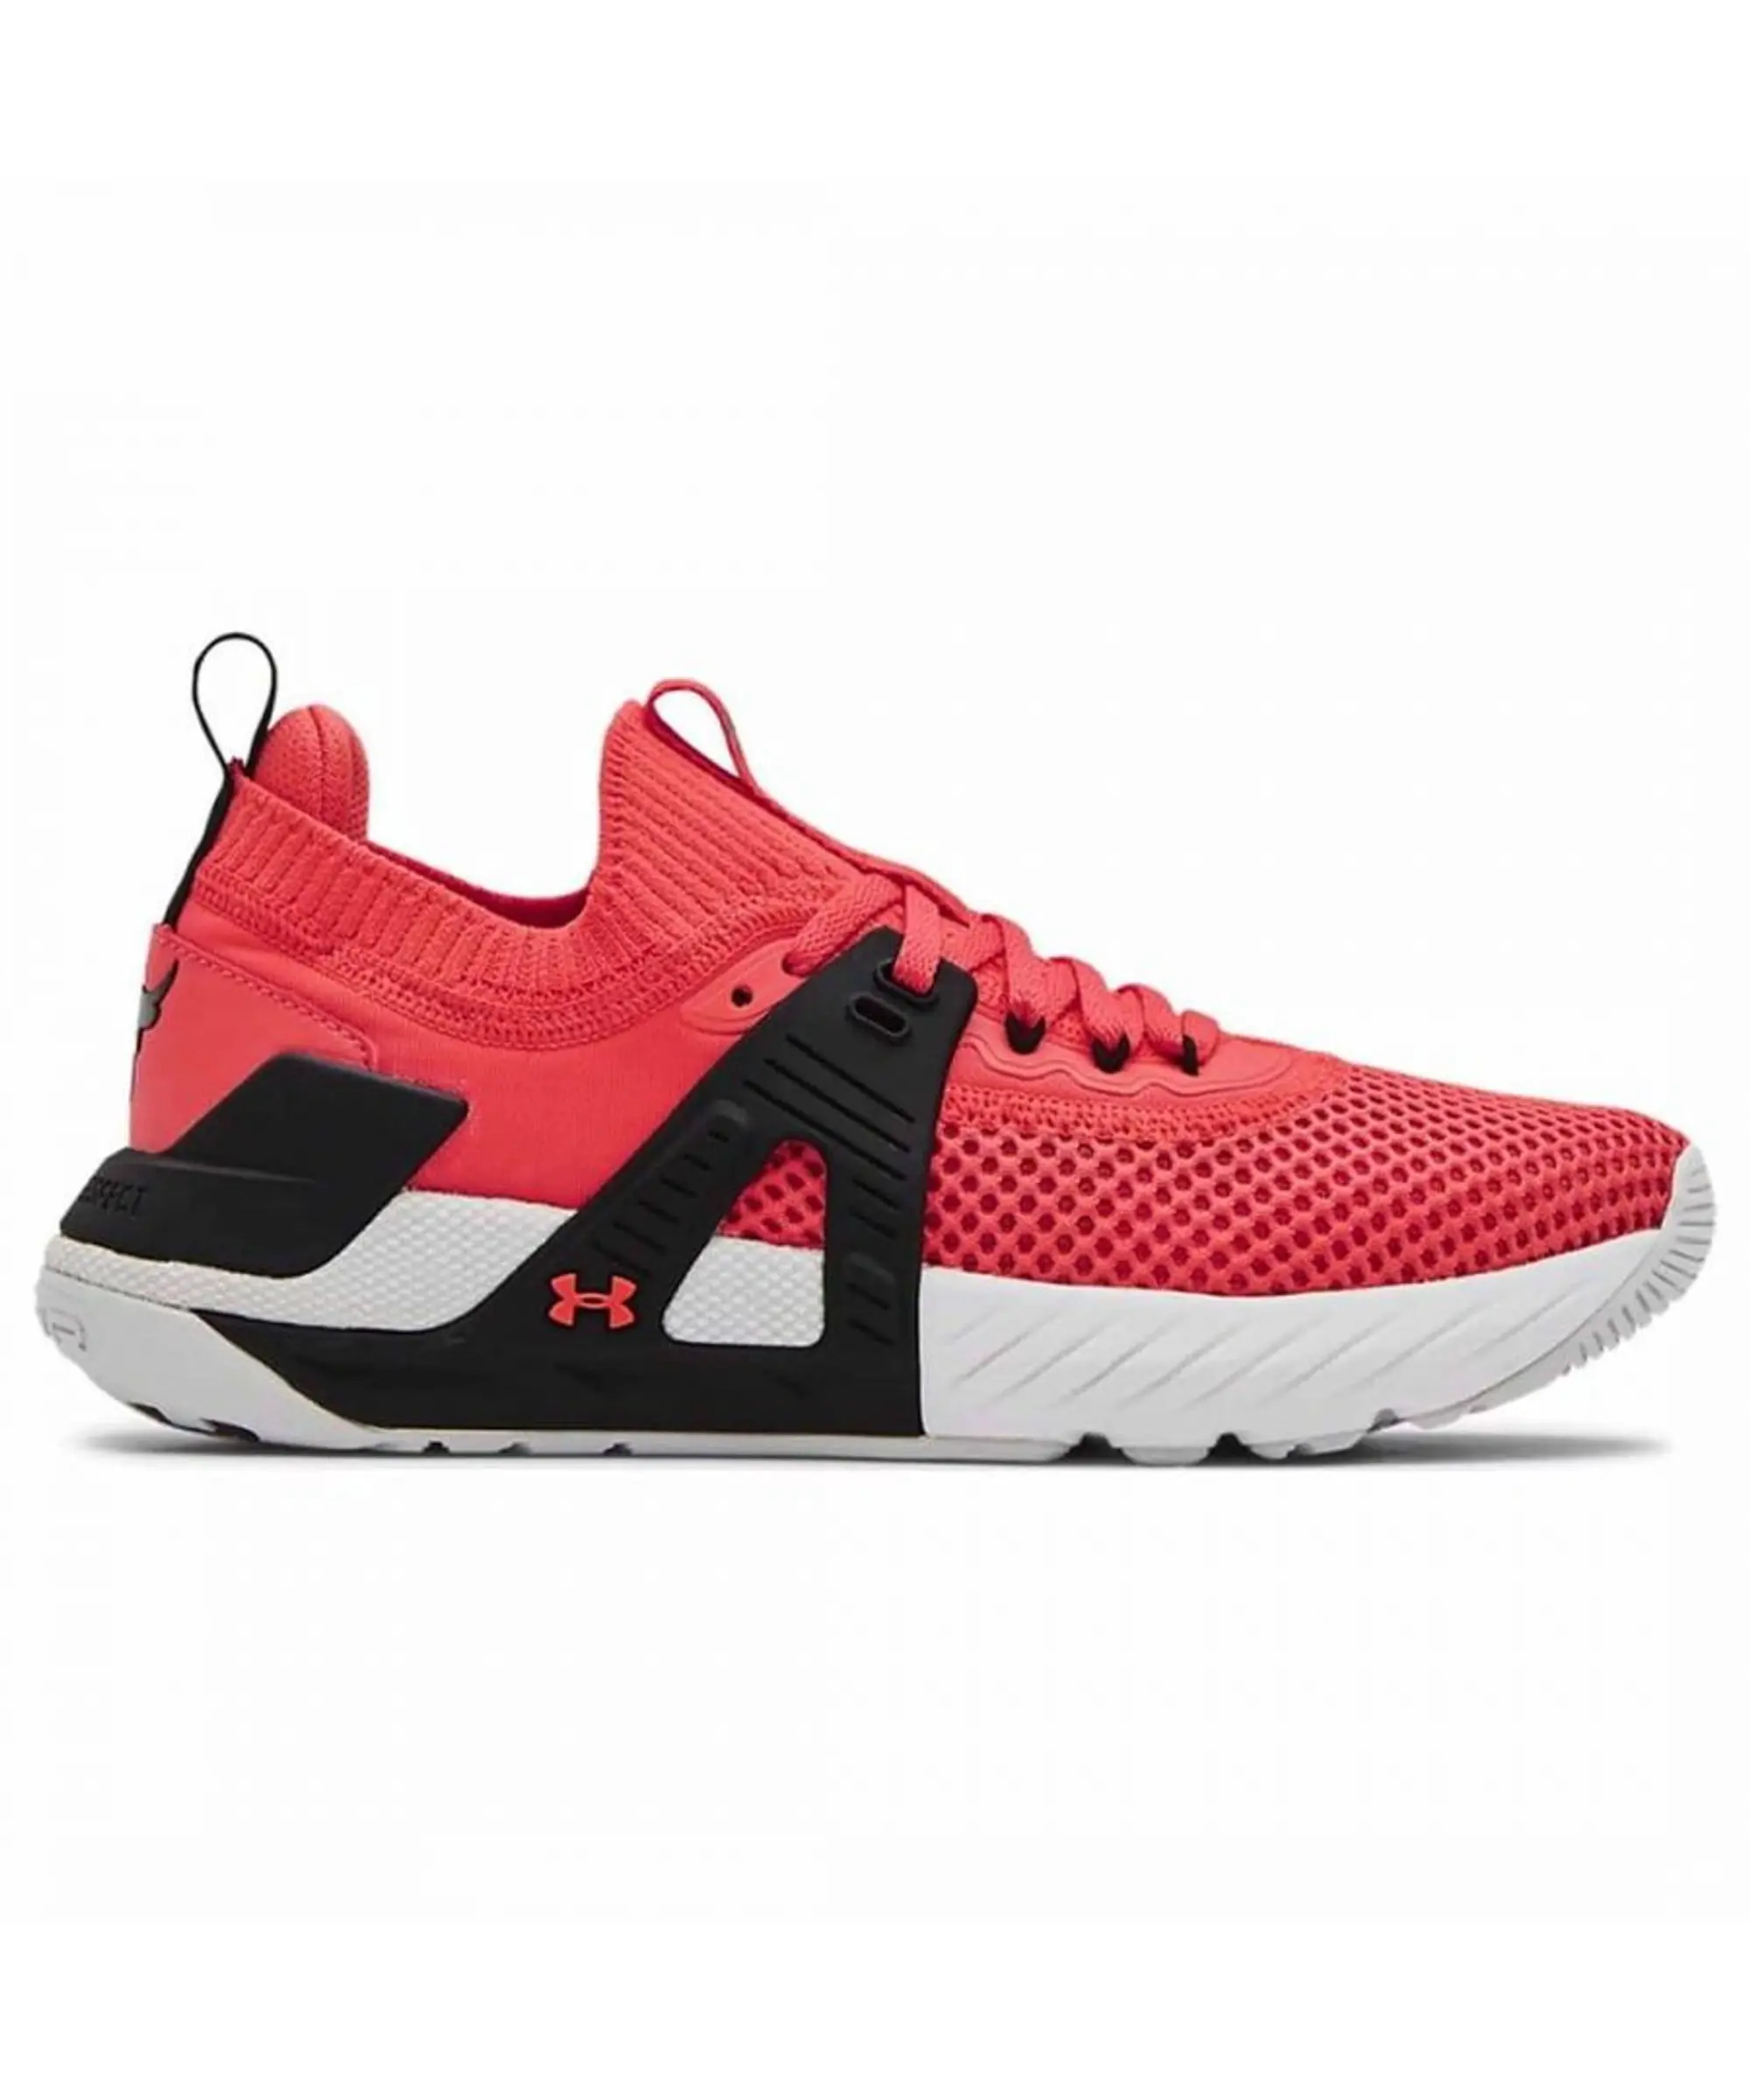 Under Armour Womens Project Rock 4 Training Shoes - Red